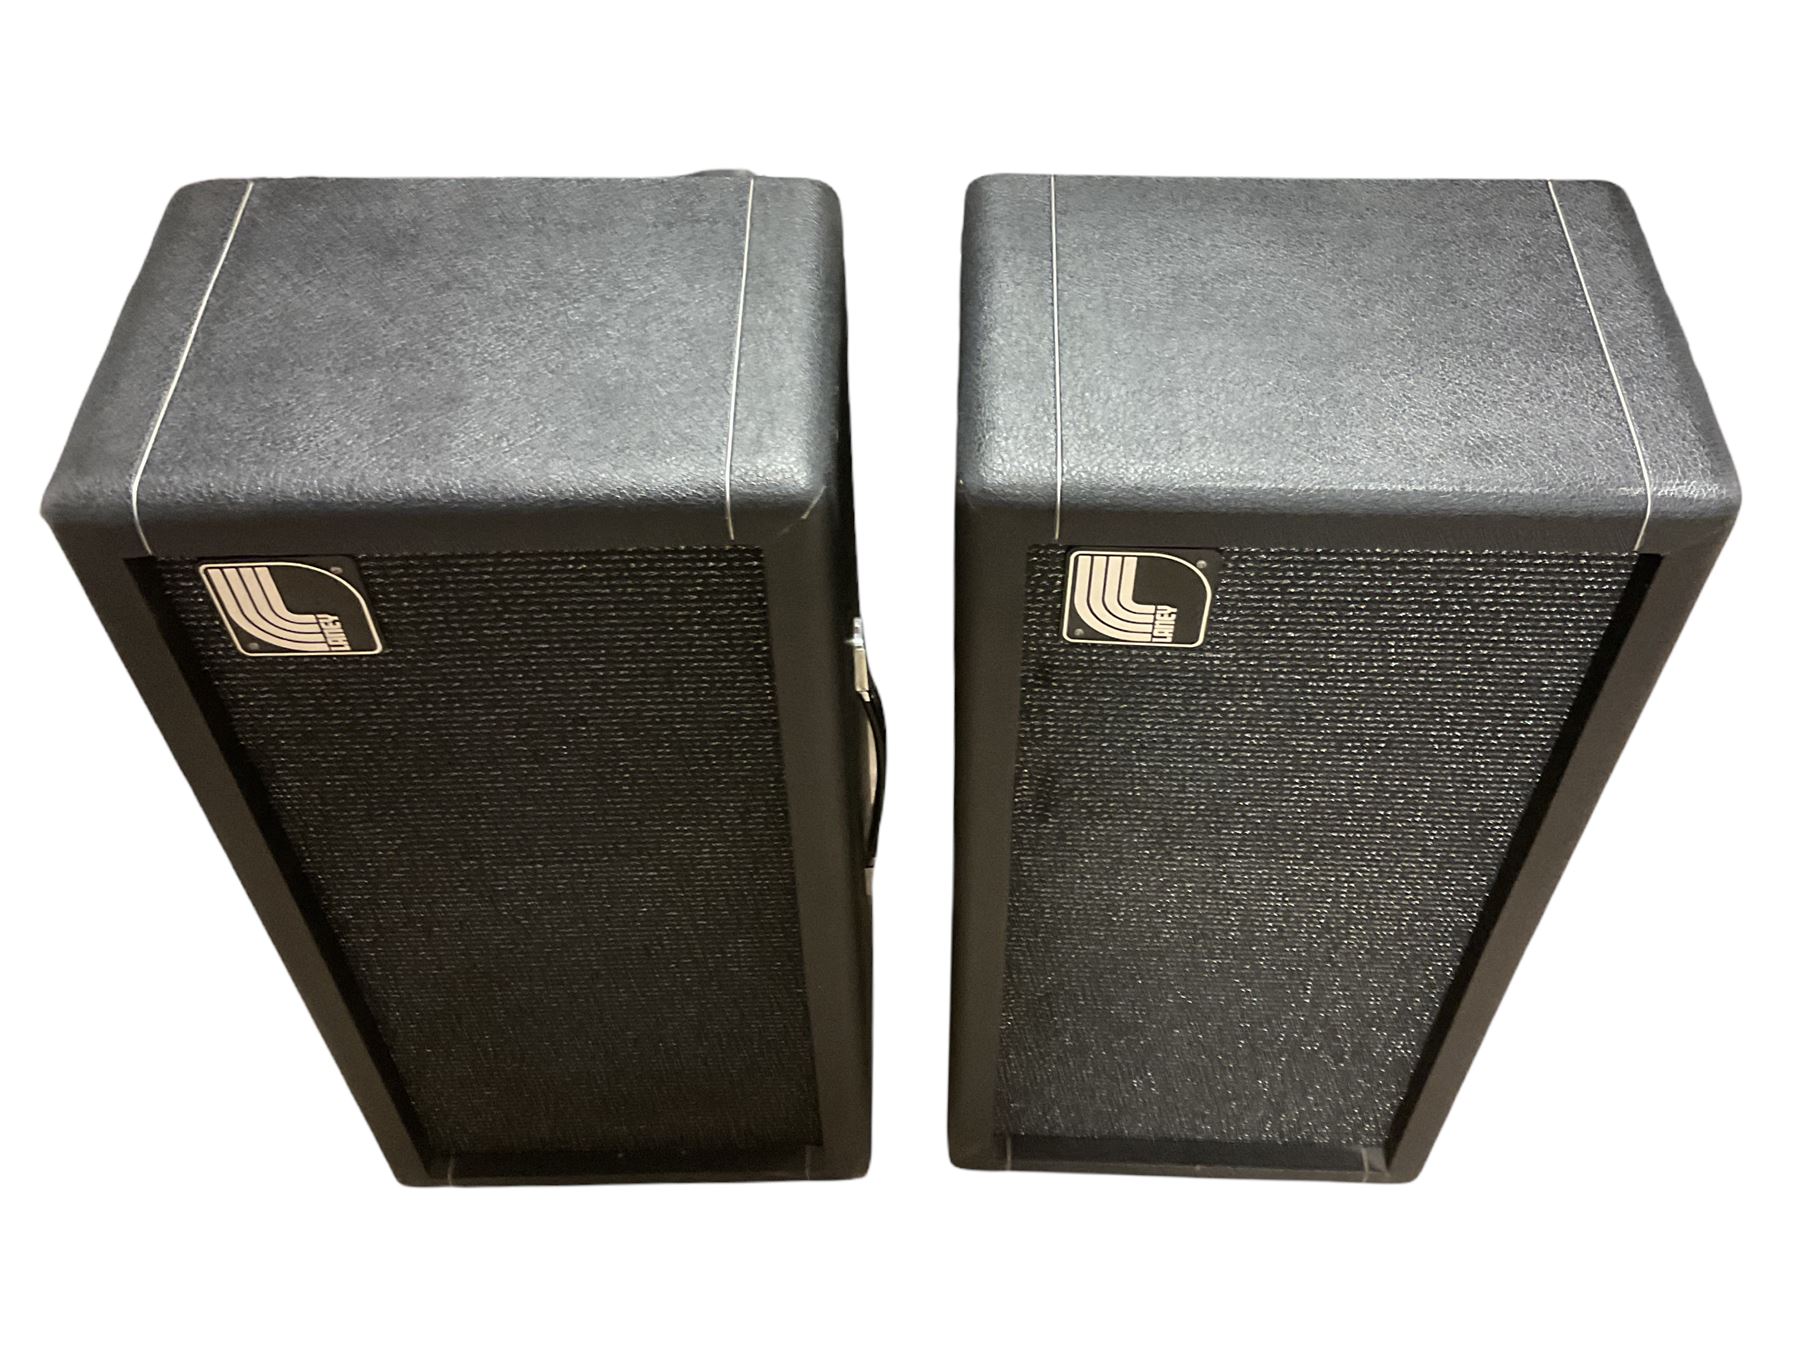 1970s pair of Laney professional speakers with leads and covers - Image 4 of 6